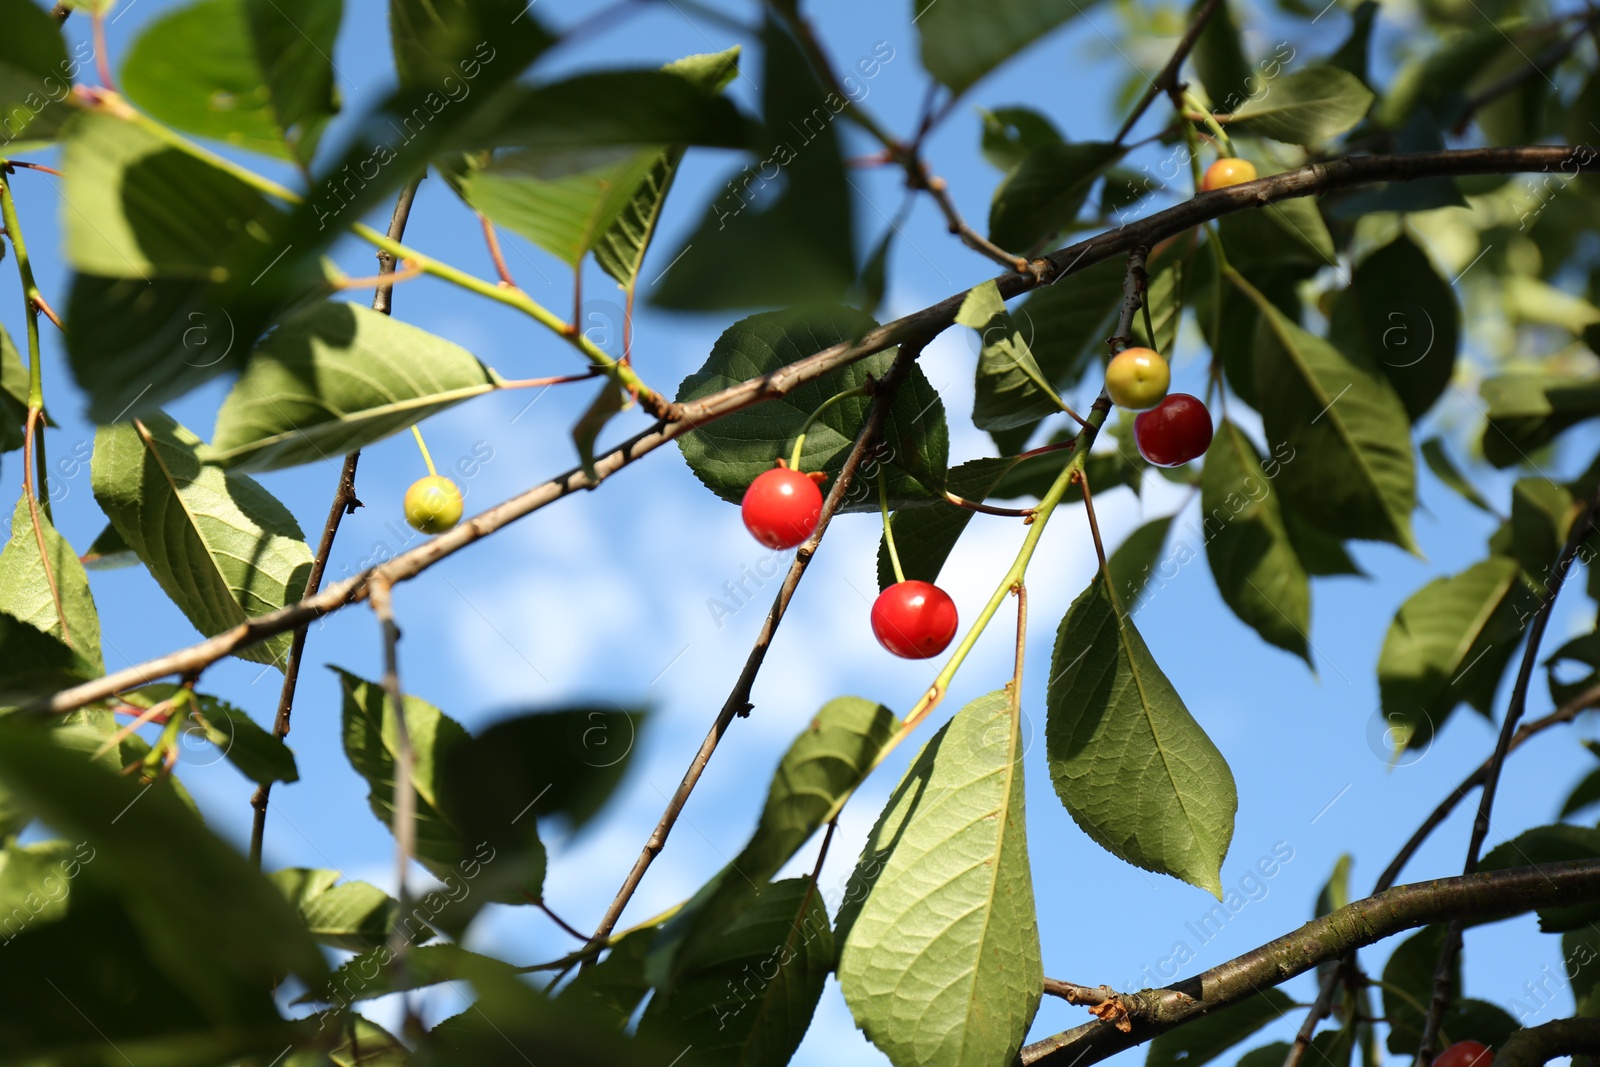 Photo of Ripening cherries on tree branch against blue sky, closeup